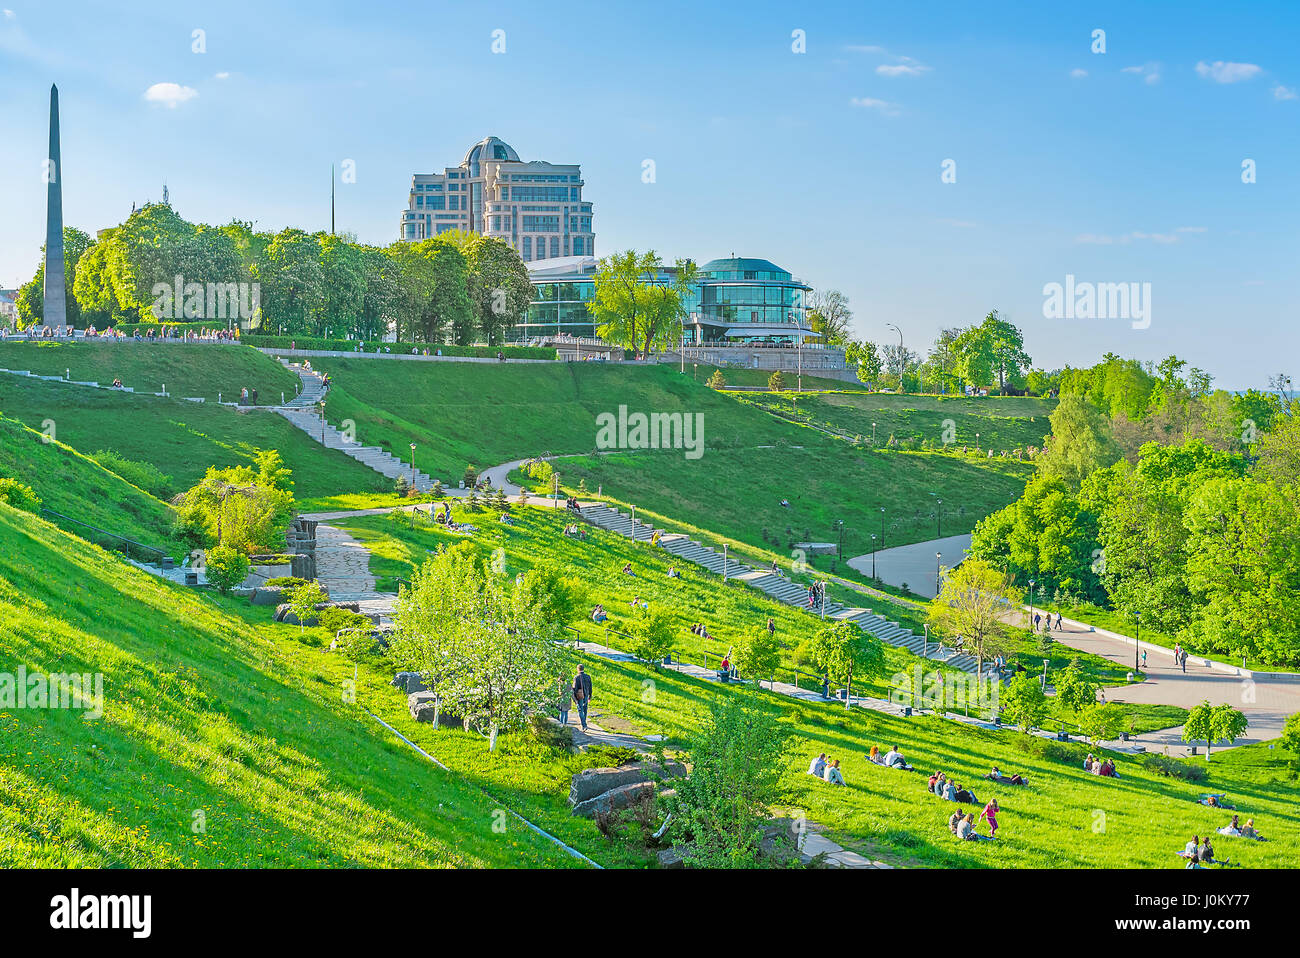 KIEV, UKRAINE - MAY 1, 2016: Park of Eternal Glory consists of terraces, so beloved by couples during warm season, on May 1, in Kiev Stock Photo